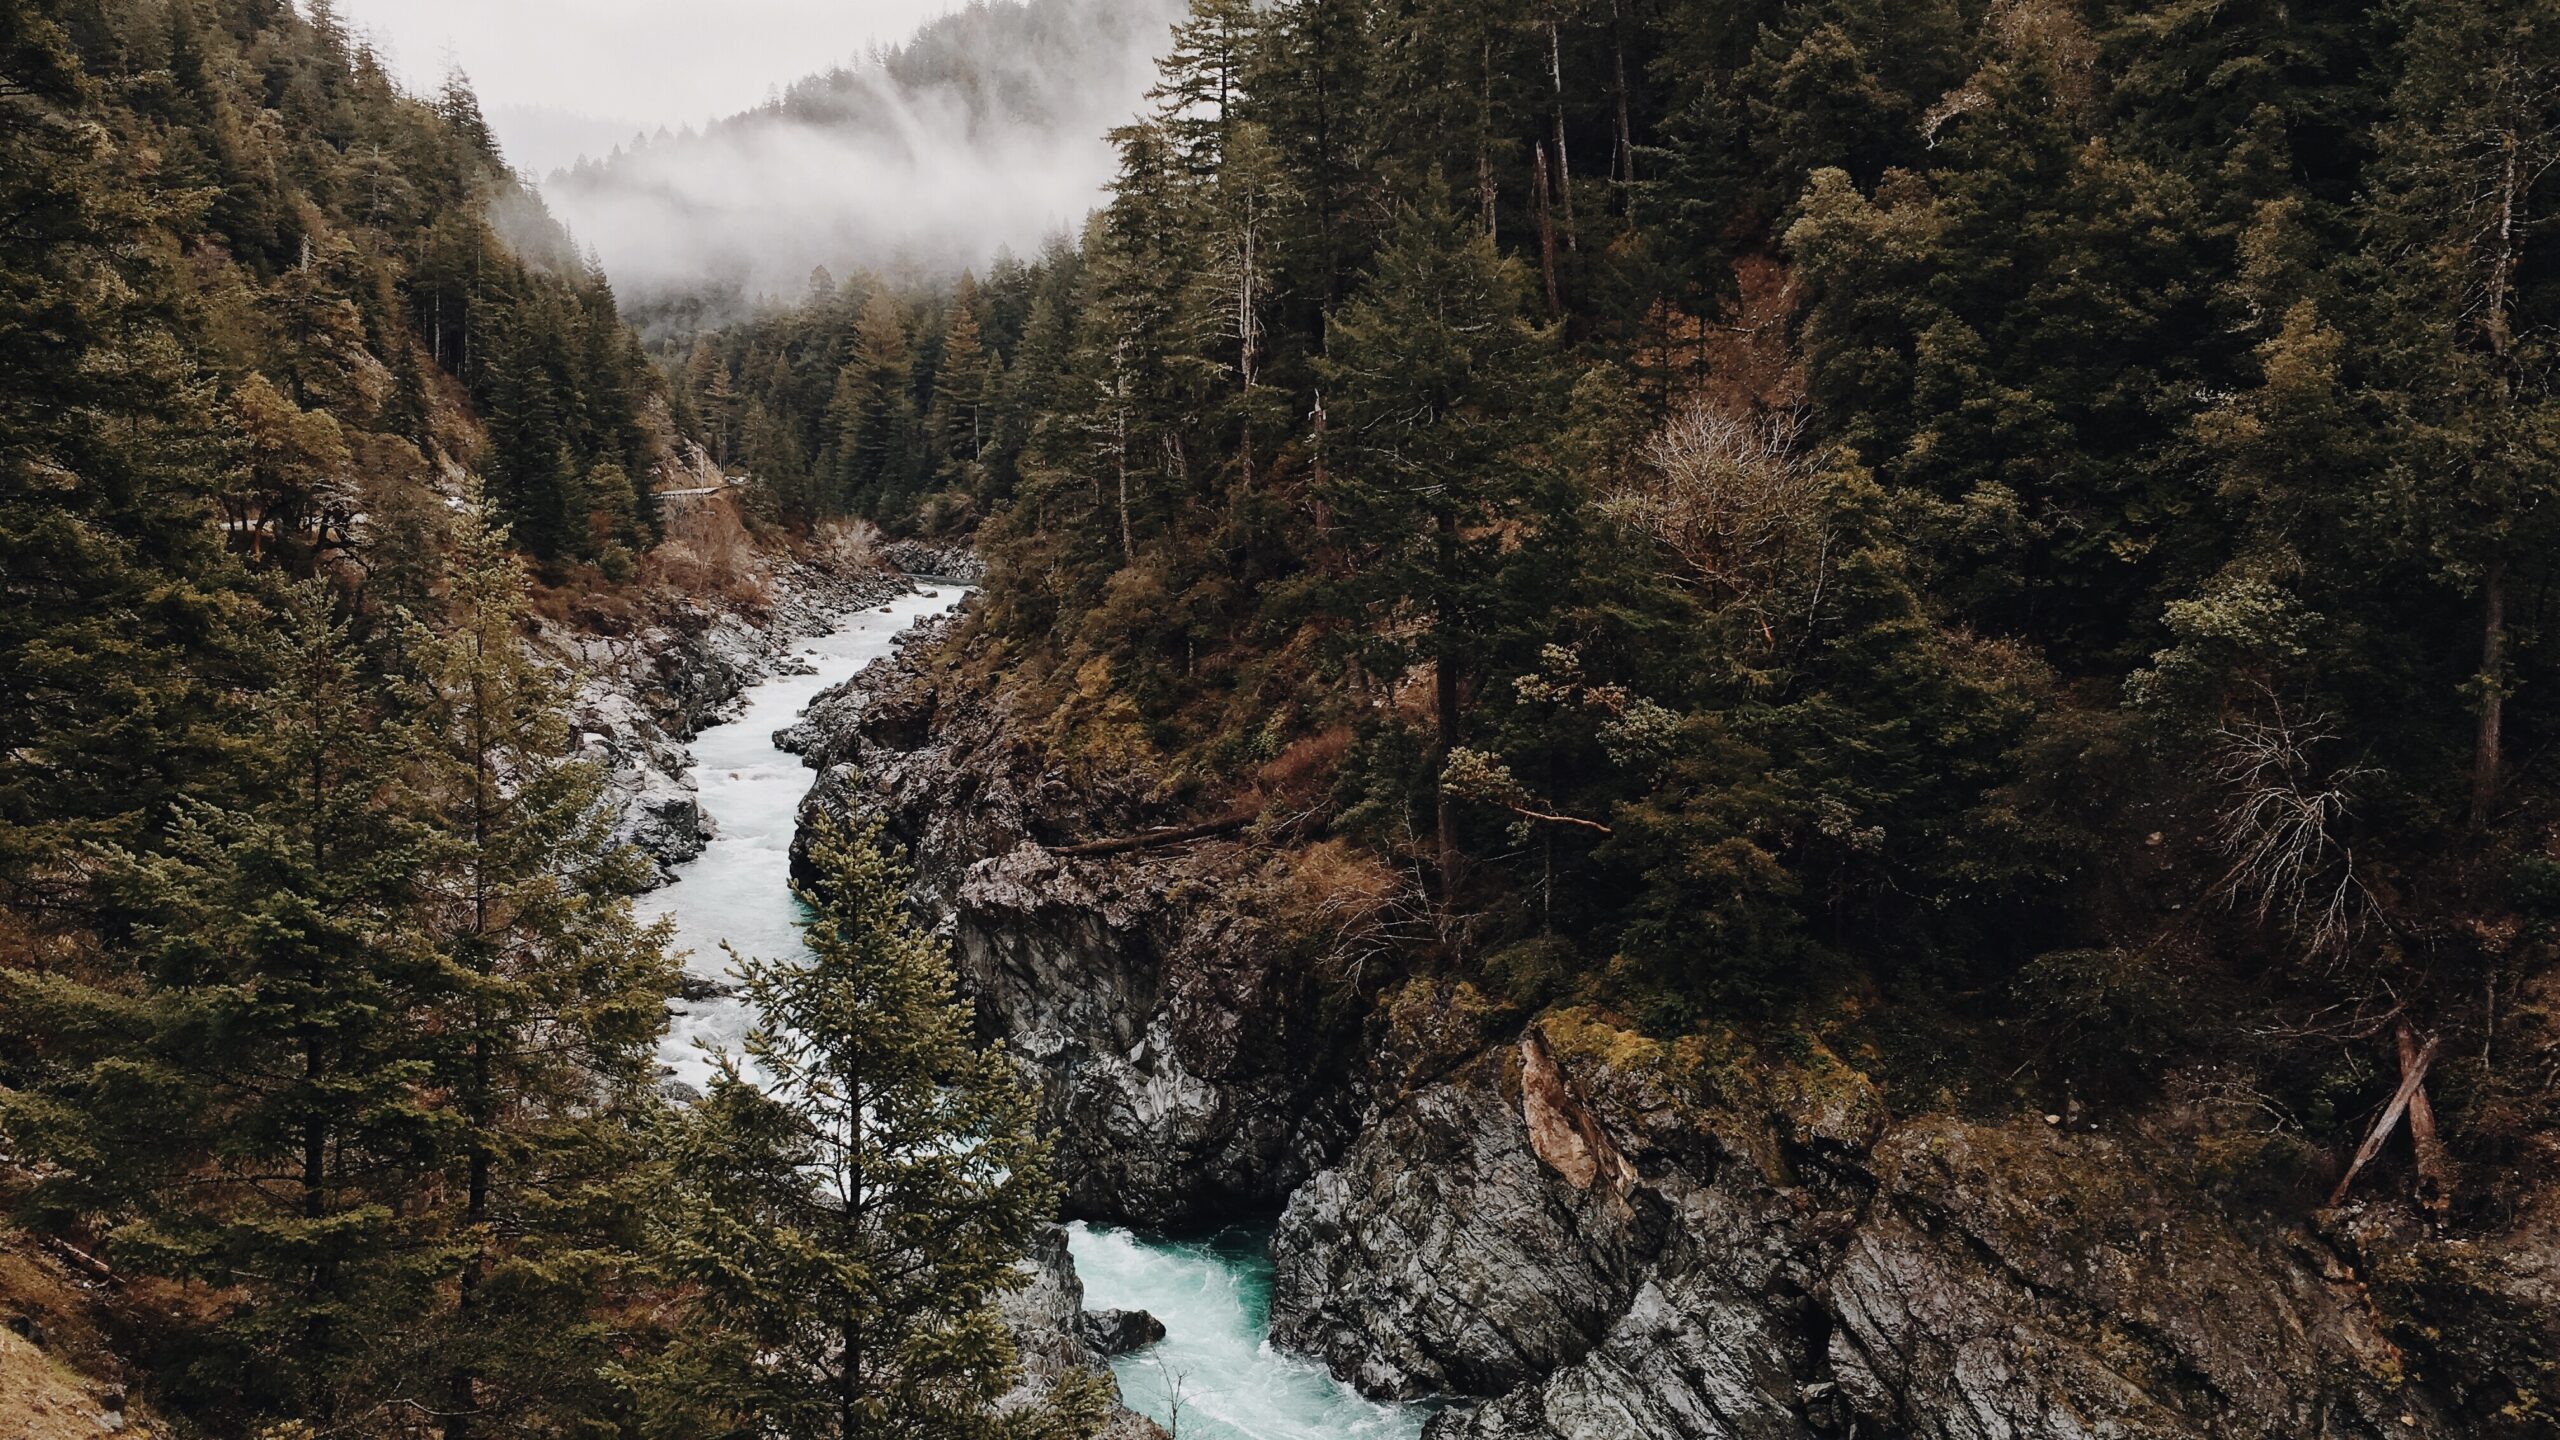 A river cutting through a rocky mountain. Photo by Steve Carter on Unsplash